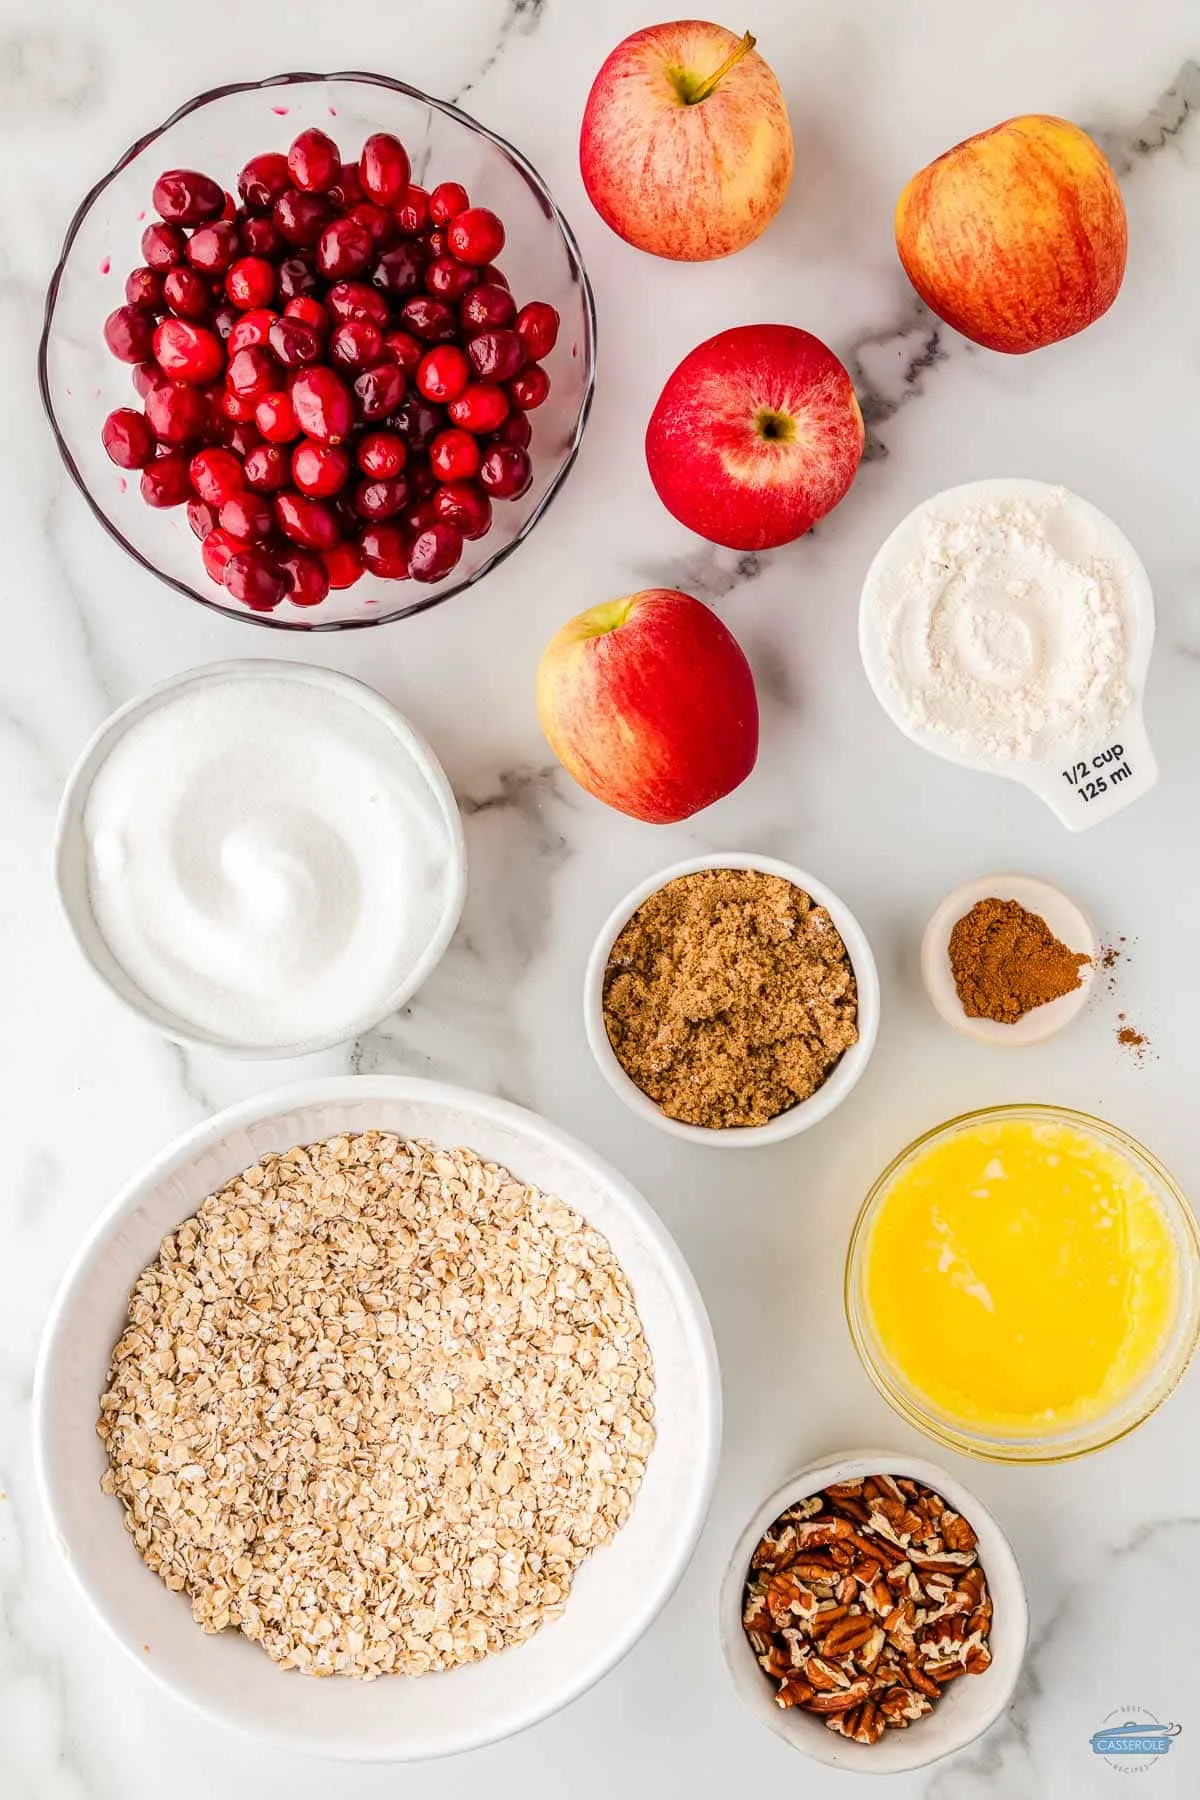 cups of sugar, 2 cups of apples, and oatmeal are ingredients for this delicious recipe